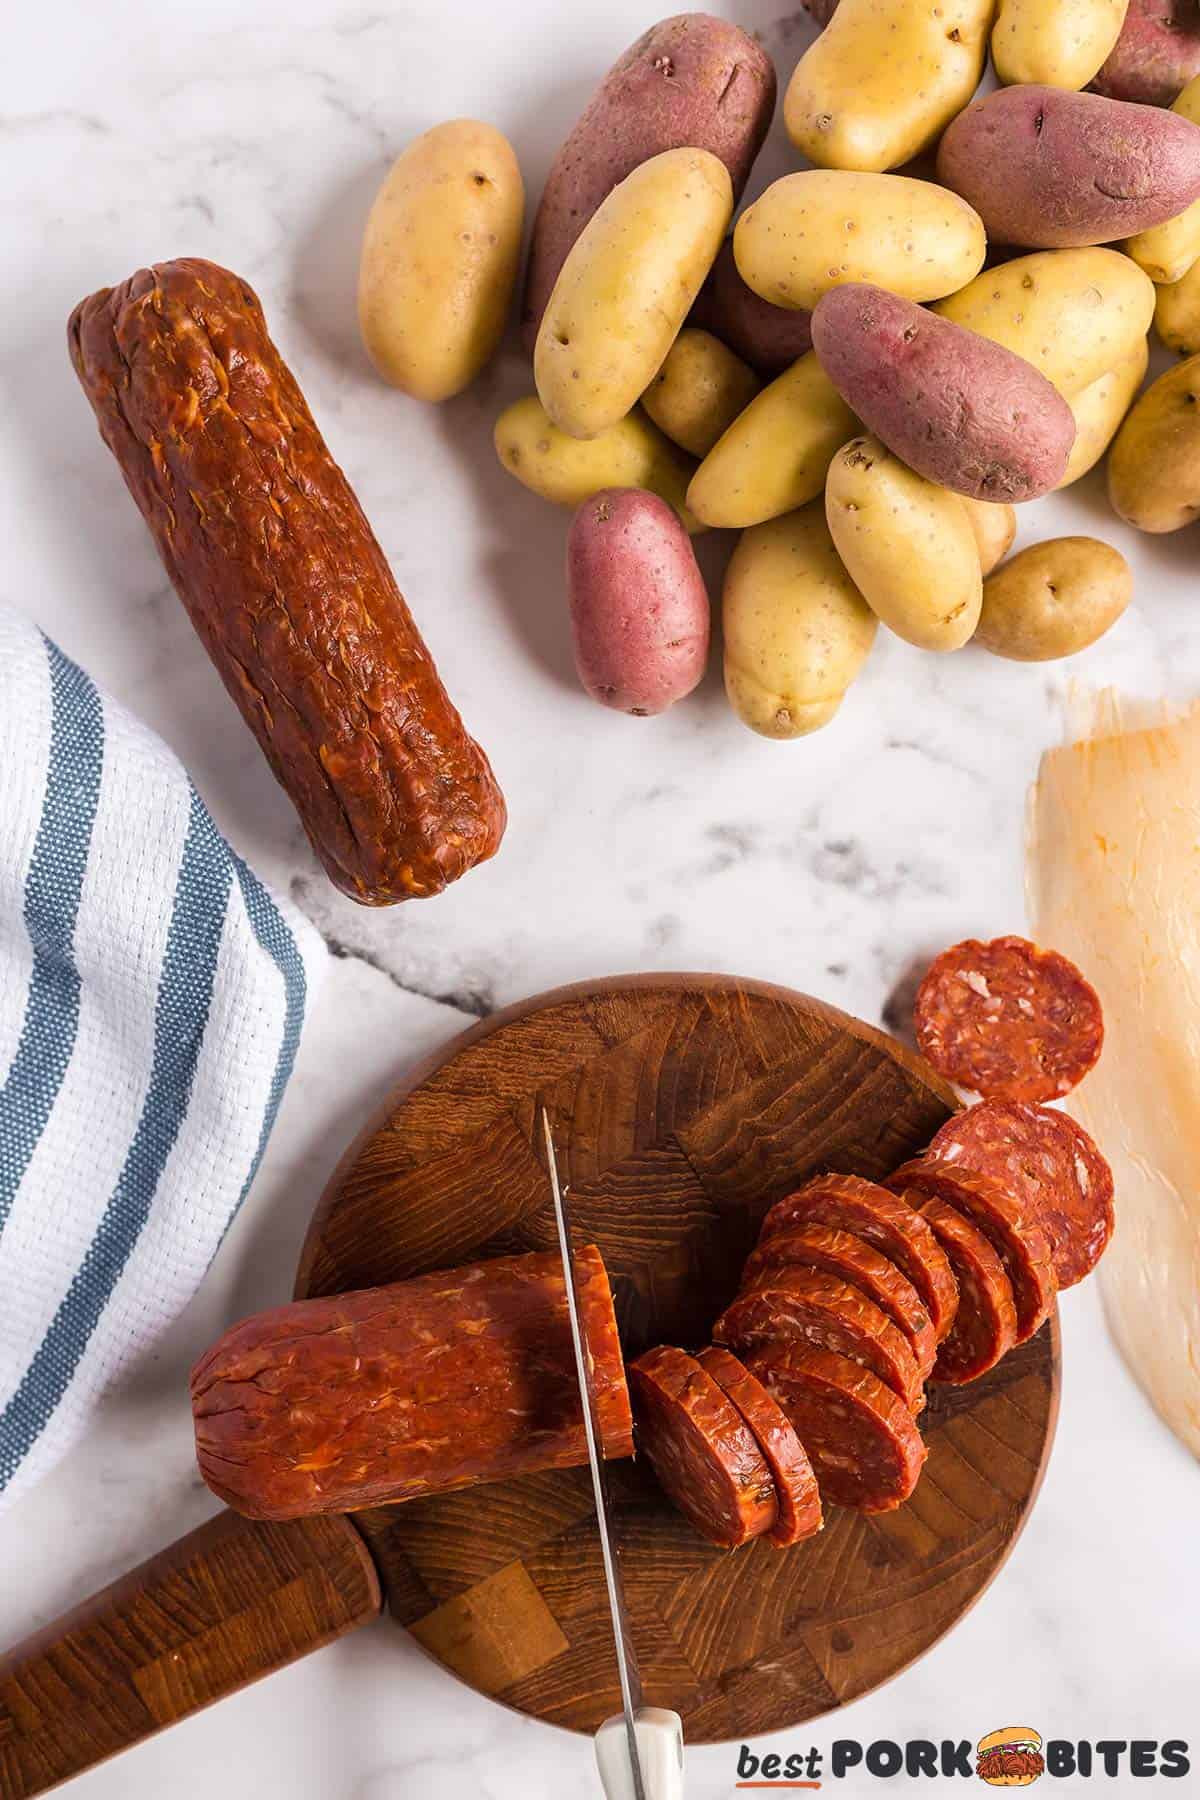 chorizo logs being sliced on a cutting board next to potatoes